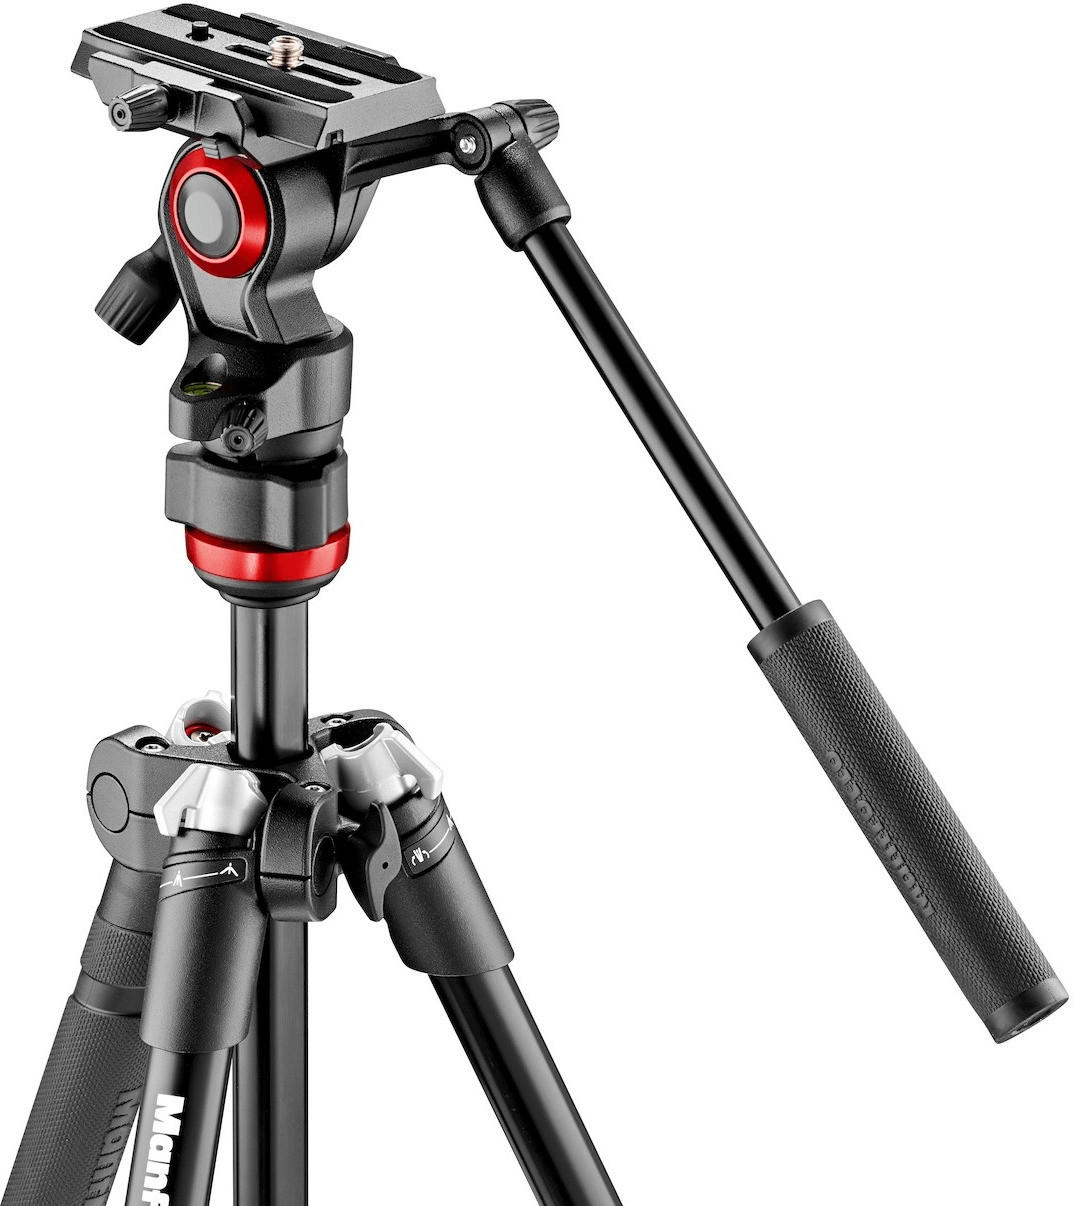 Manfrotto Befree Live Kit